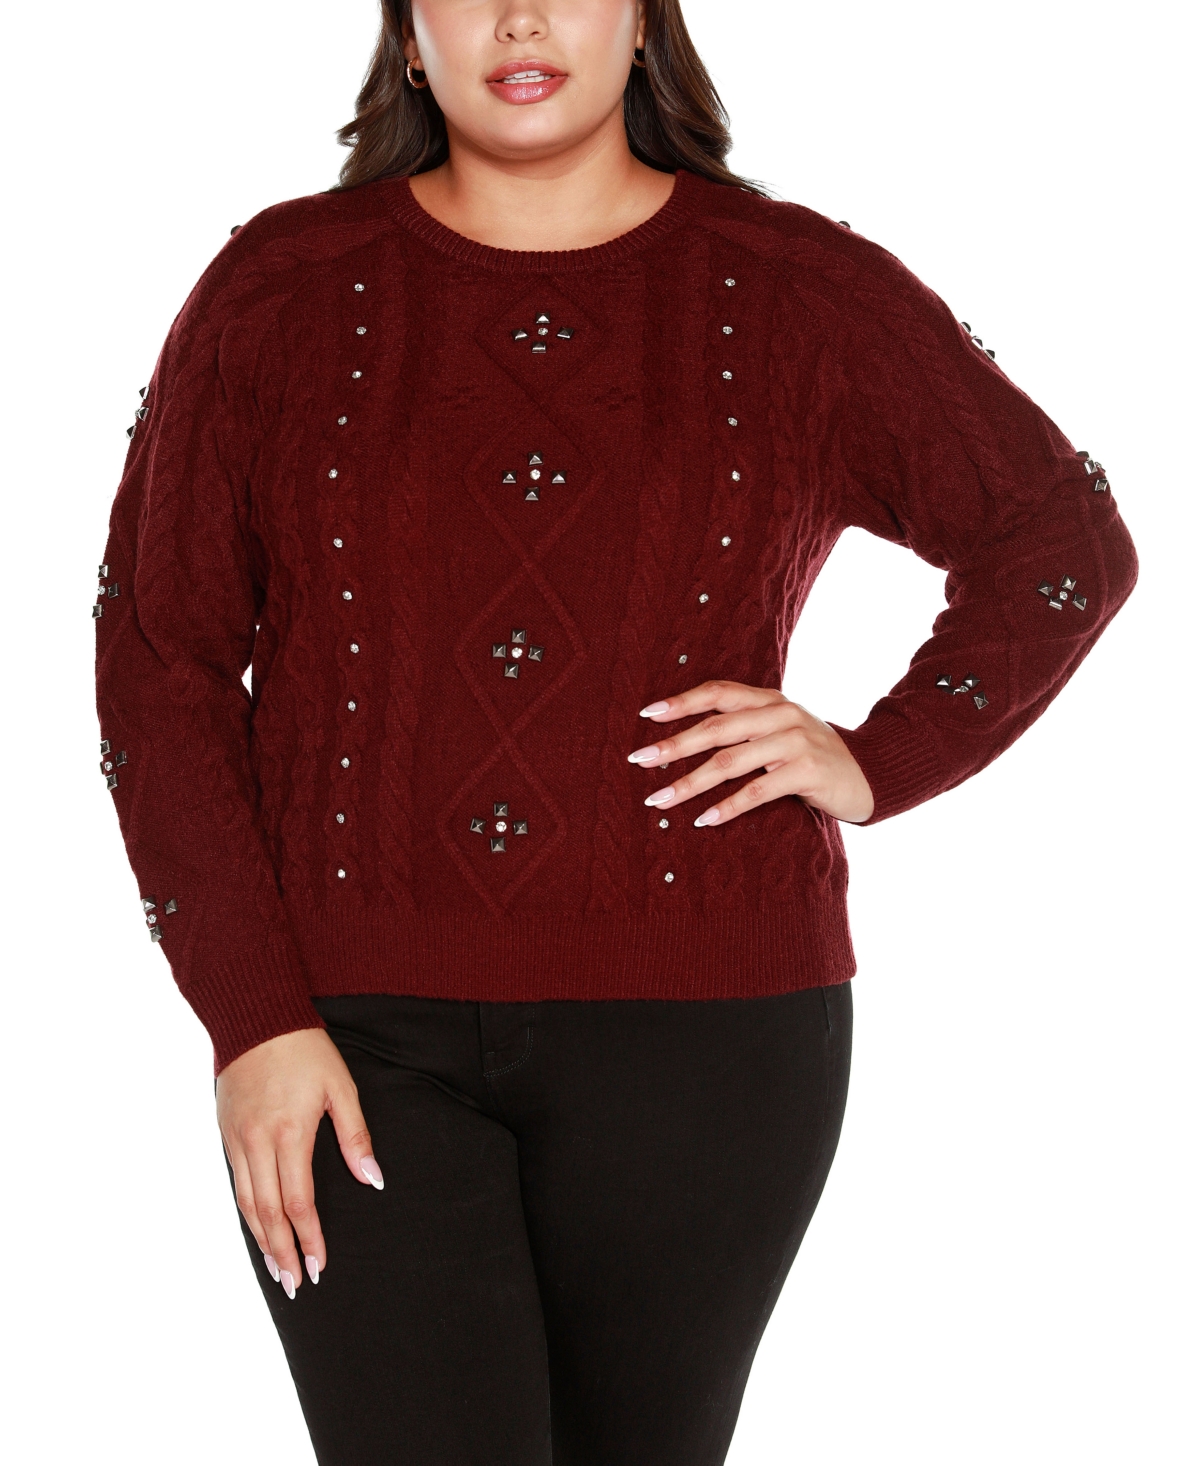 BELLDINI BLACK LABEL PLUS SIZE EMBELLISHED CABLE KNIT SWEATER